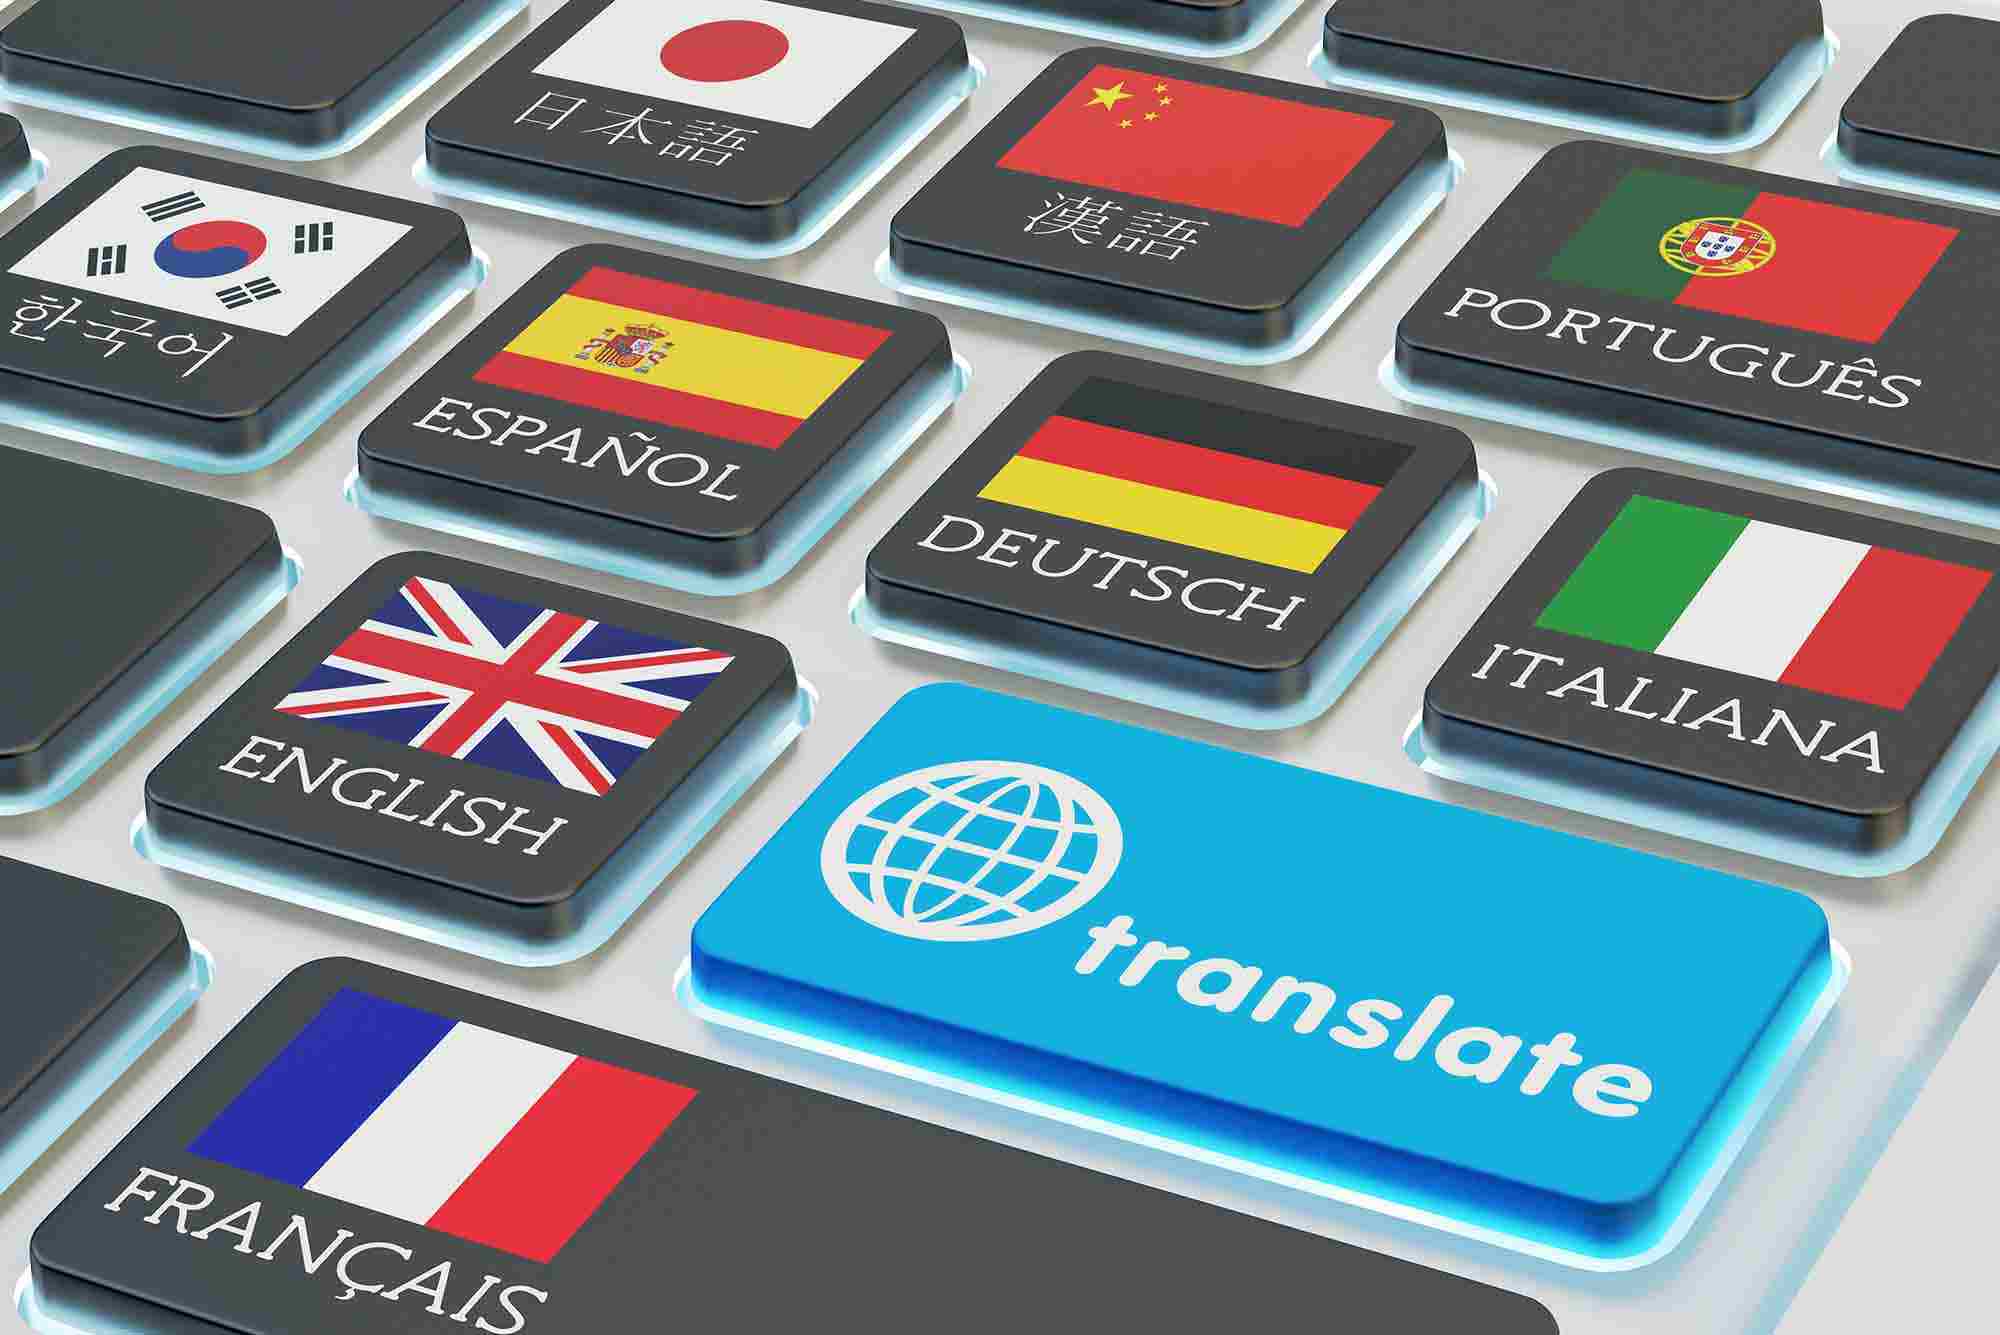 Translation Studies is a growing discipline with opportunities in diverse sectors.